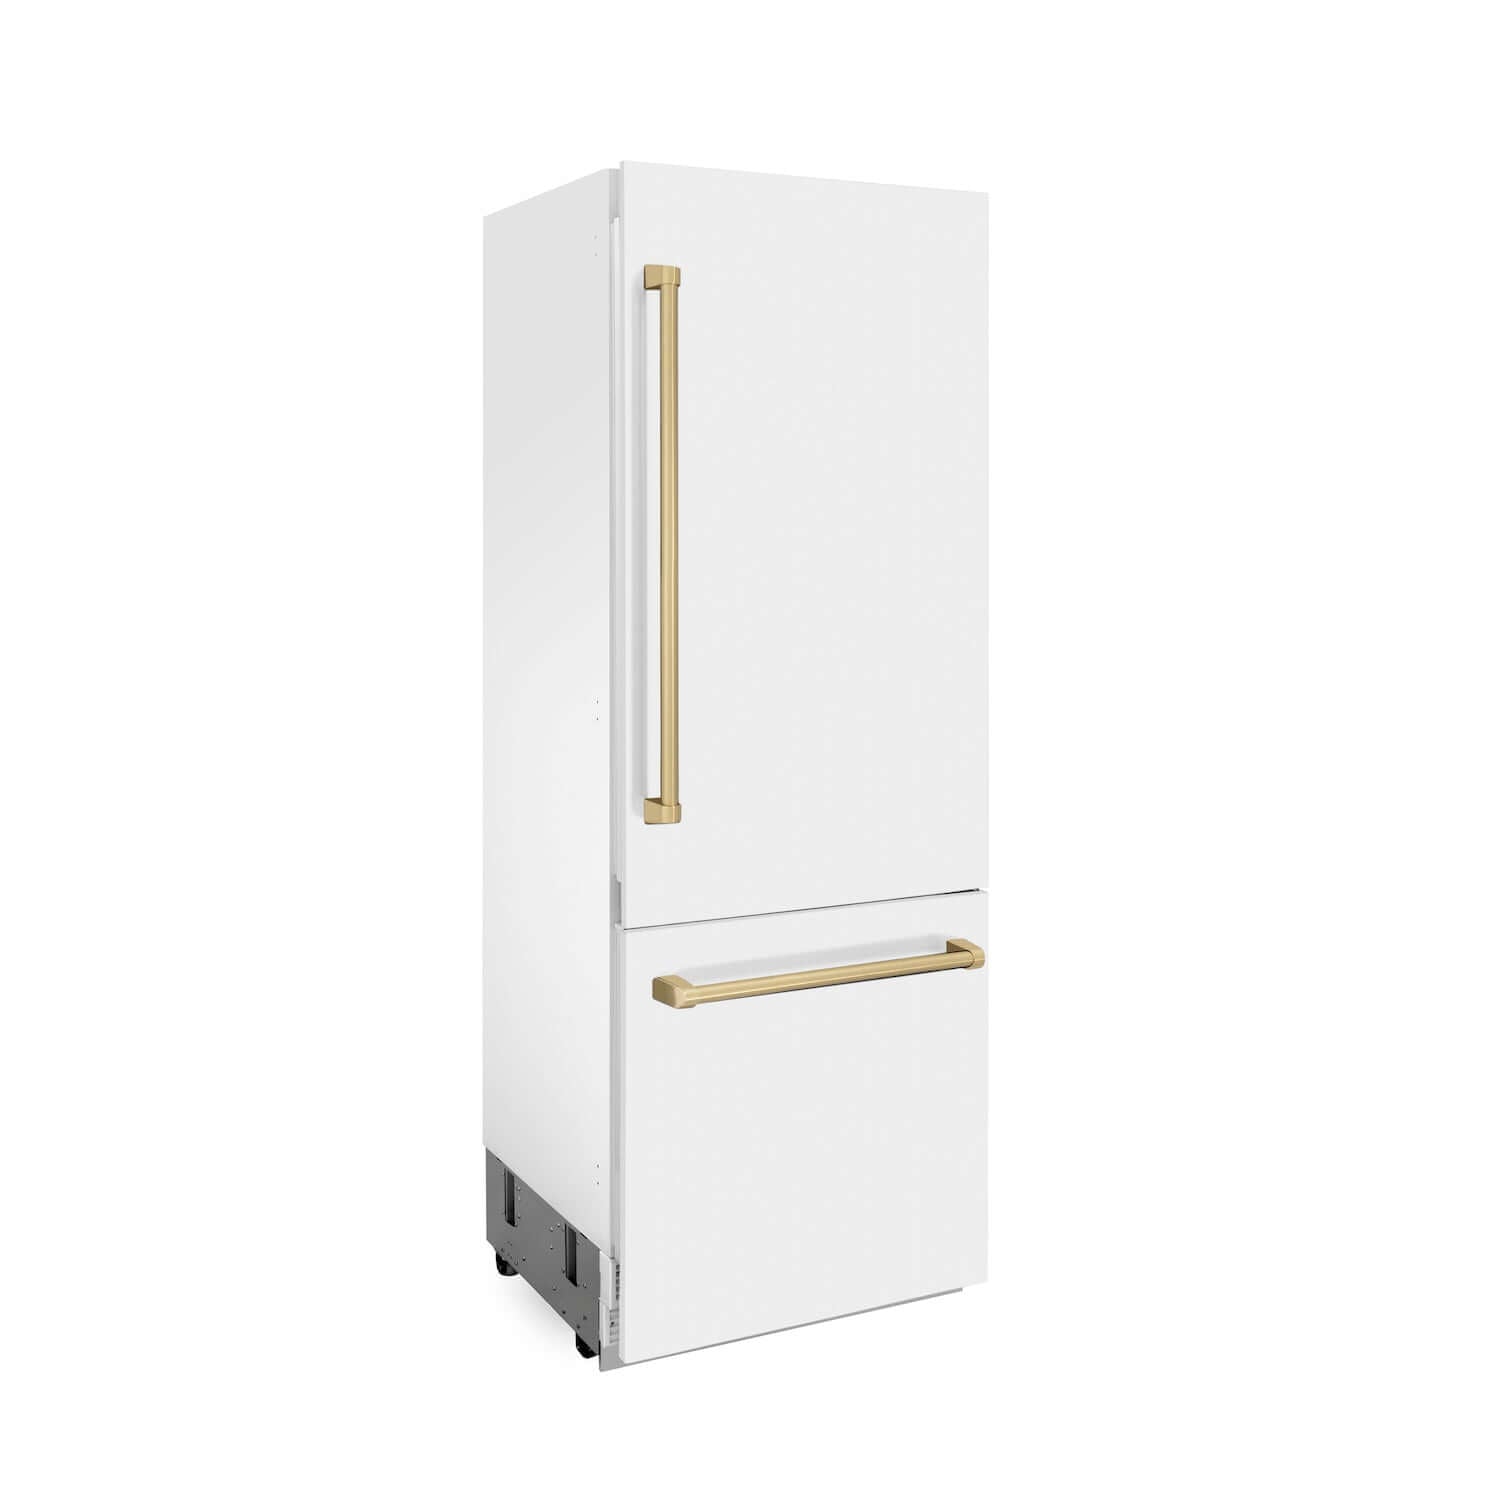 ZLINE 30" Autograph Edition Built-in Refrigerator with White Matte Panels and Accent Handles side.